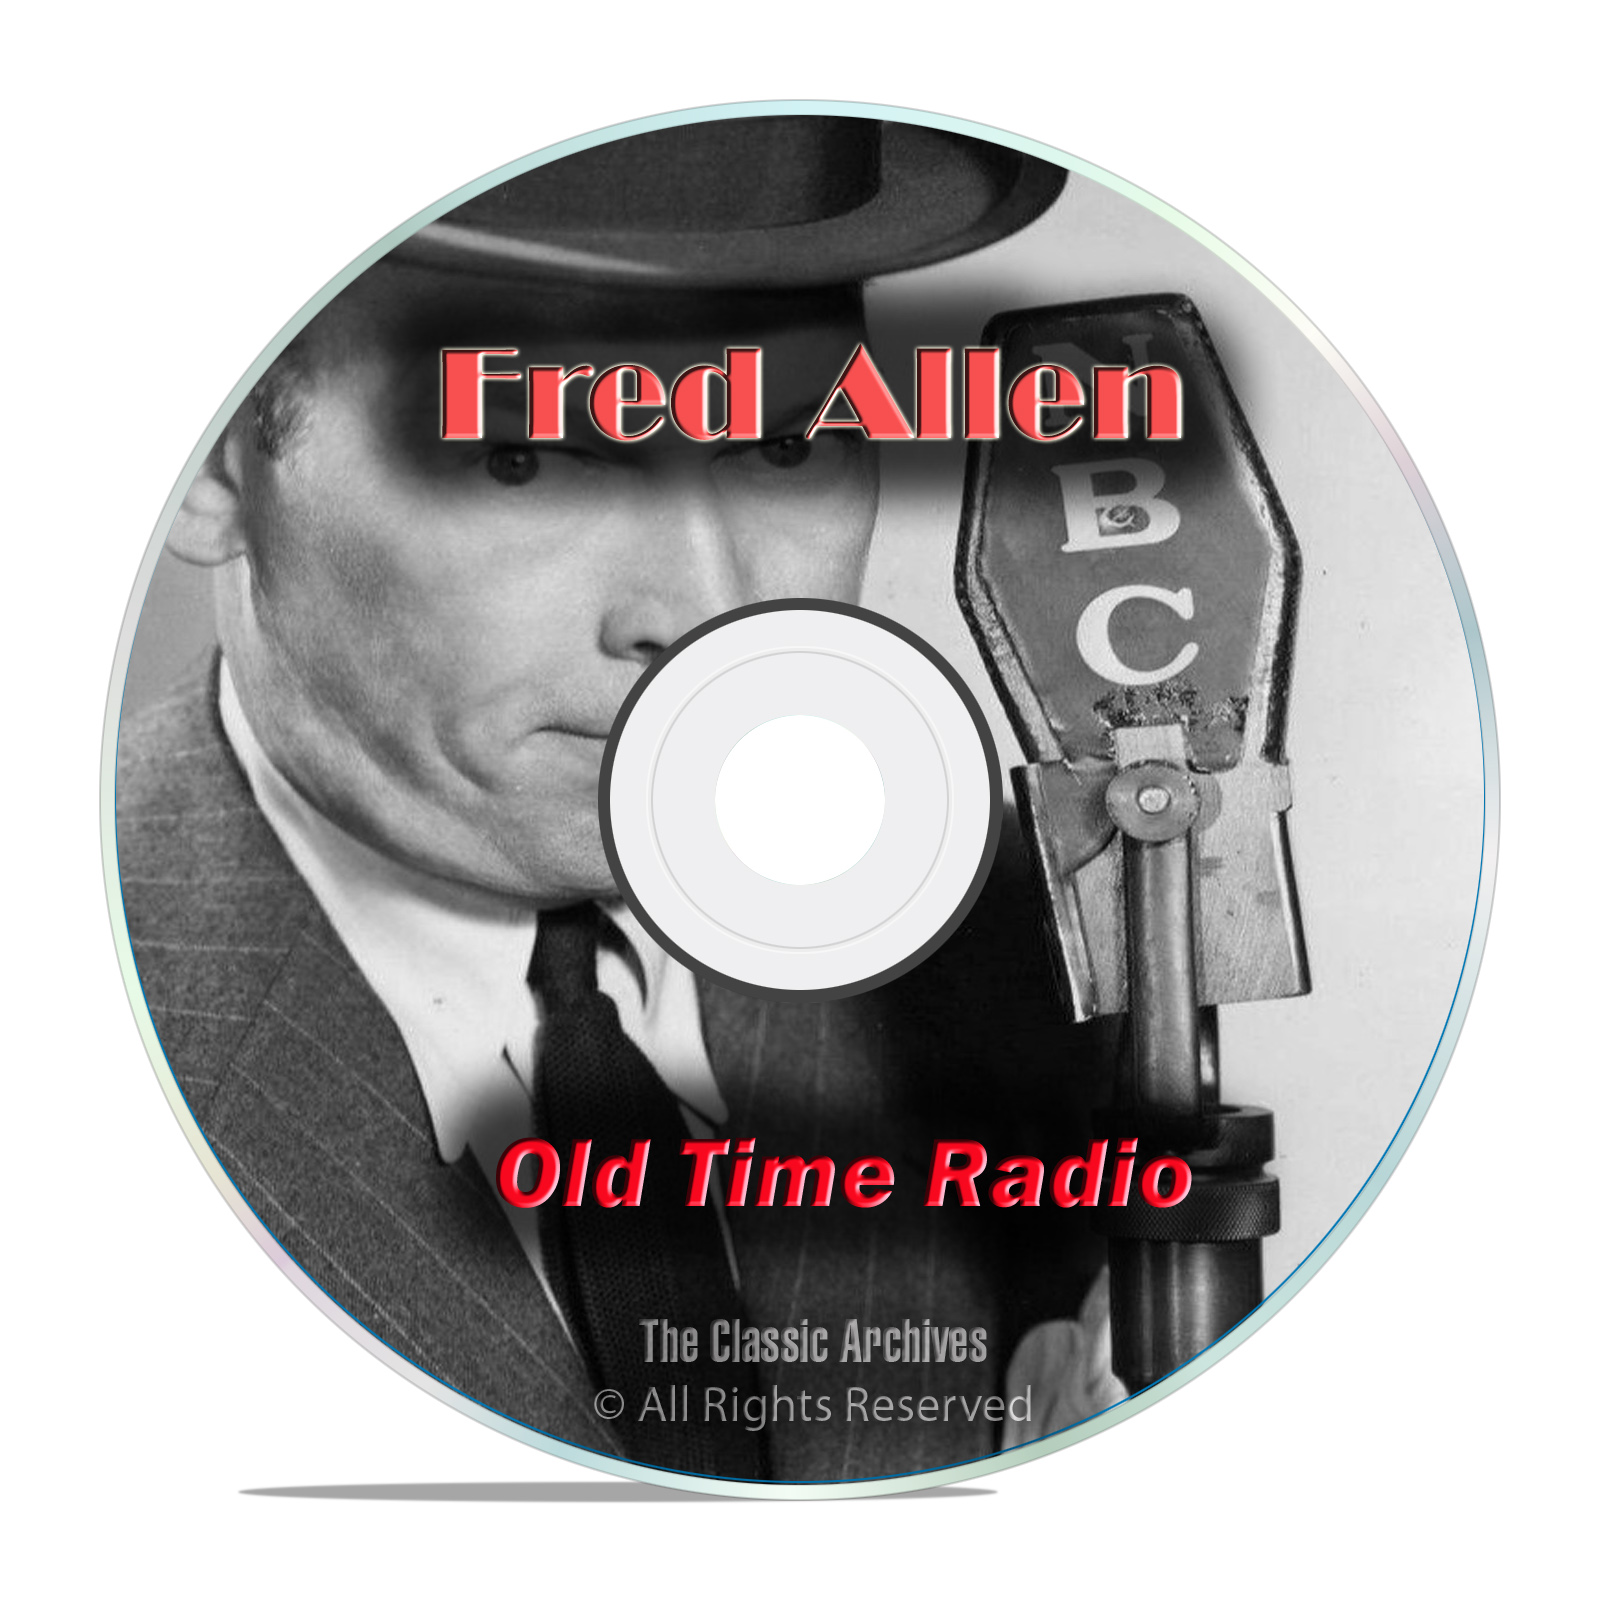 Fred Allen, Comedy, Music & Variety Shows, 849 Old Time Radio Shows, OTR